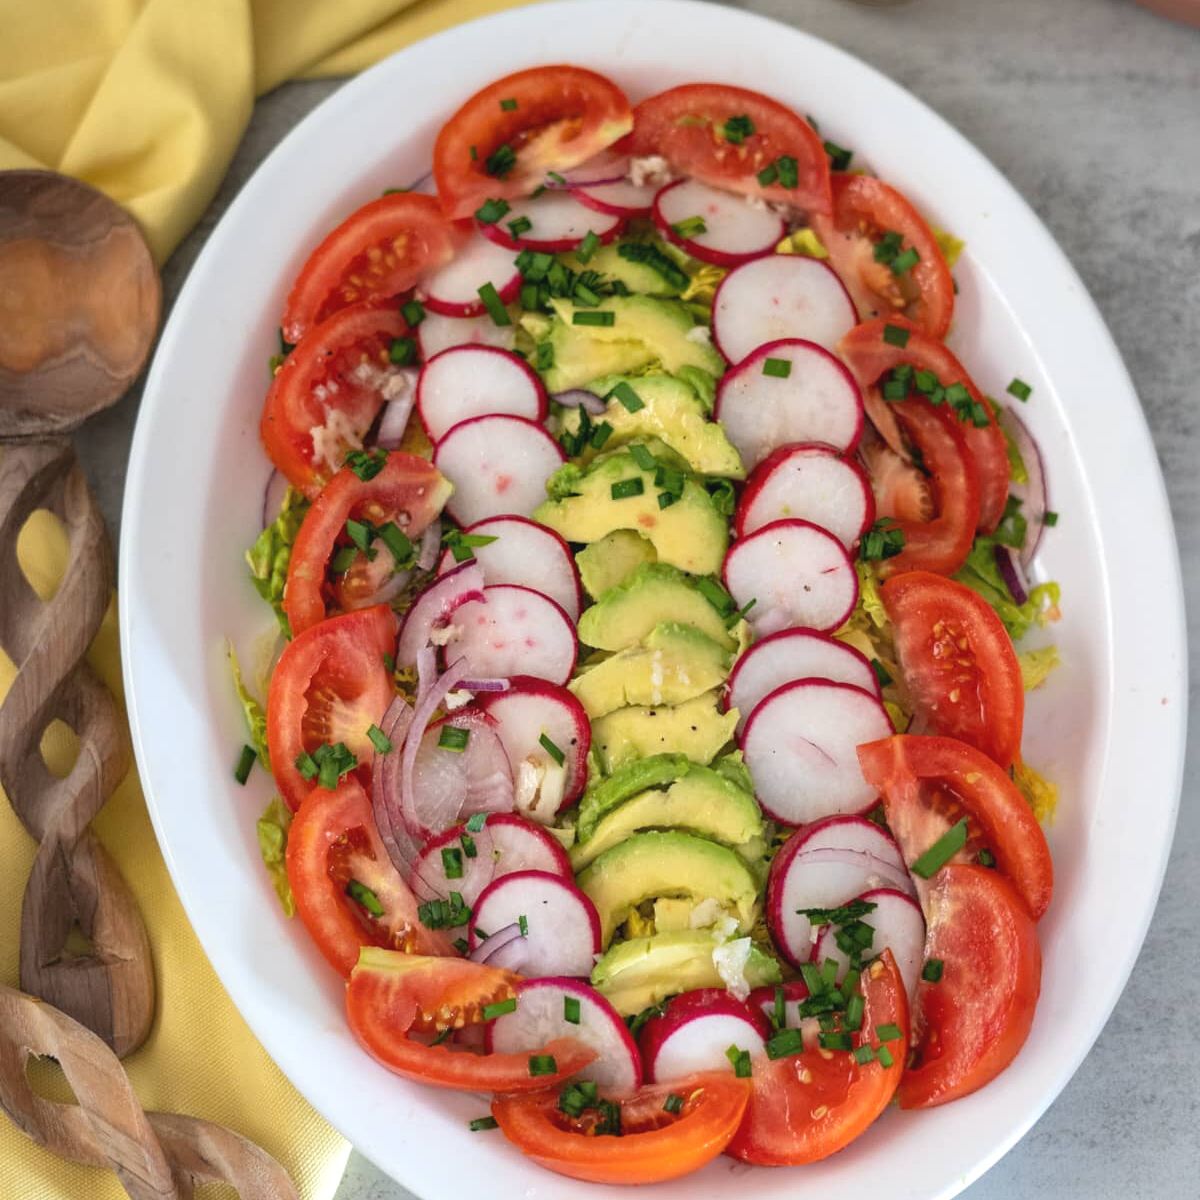 A mixture of tomato, radishes, avocado and red onion arranged on an oval plate.